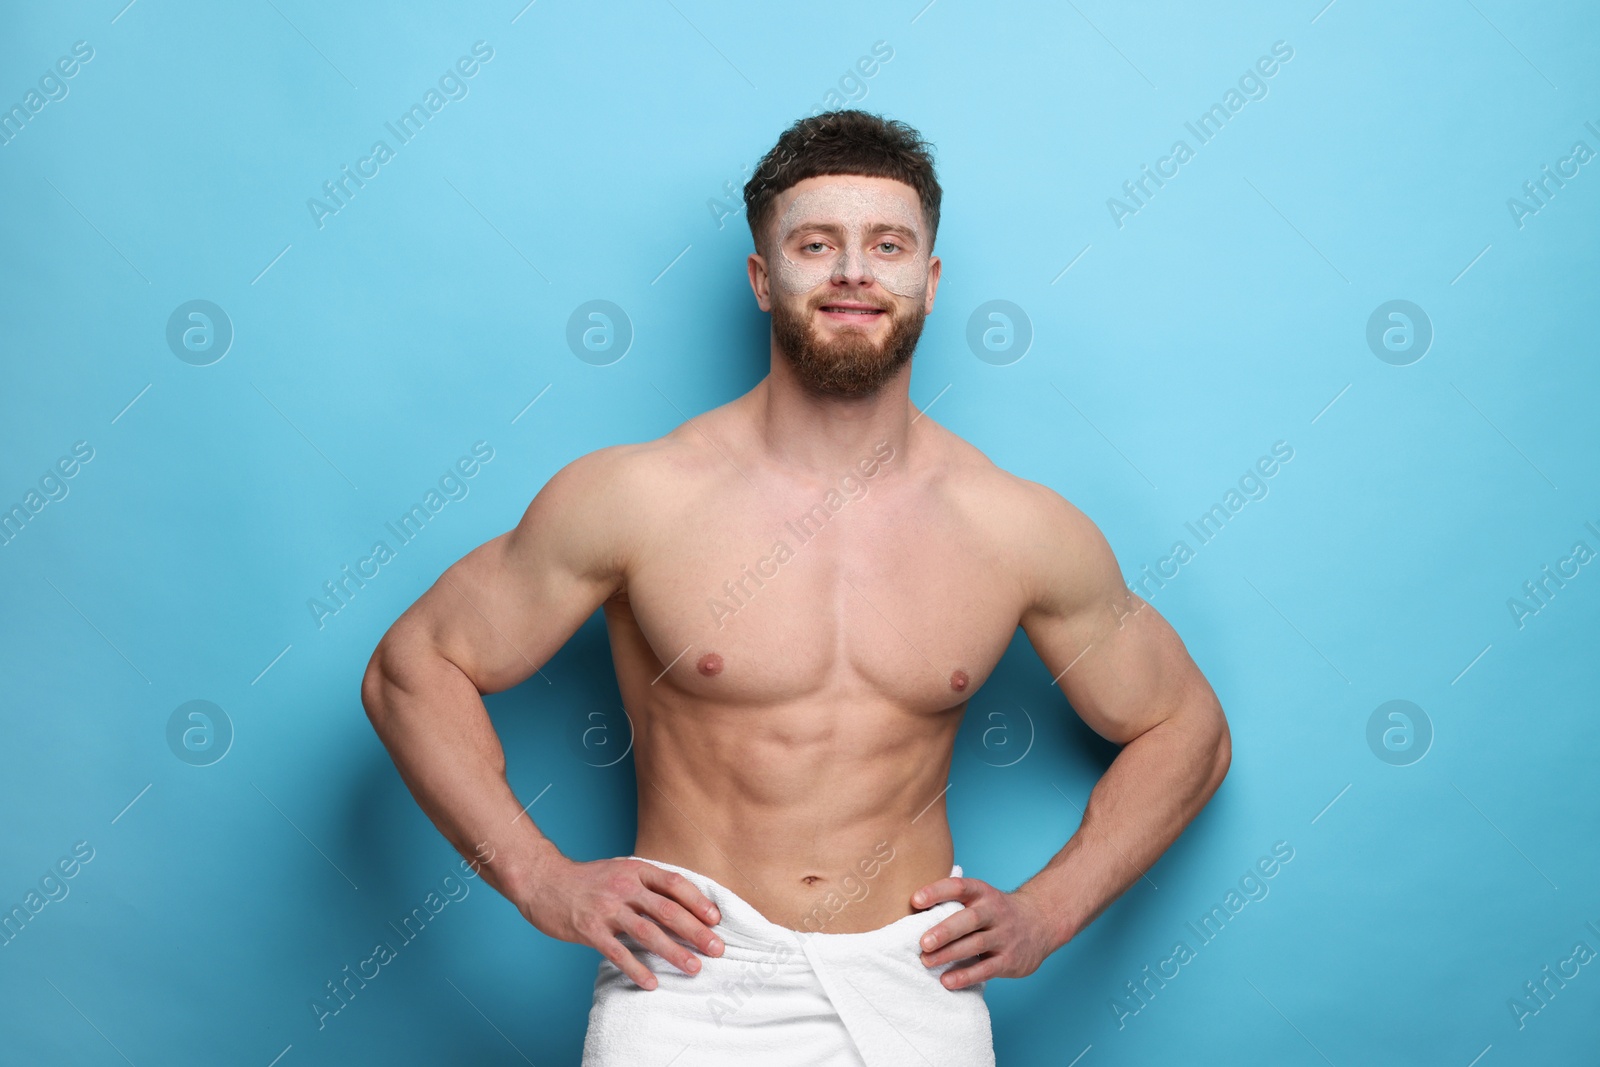 Photo of Handsome man with facial mask on his face against light blue background